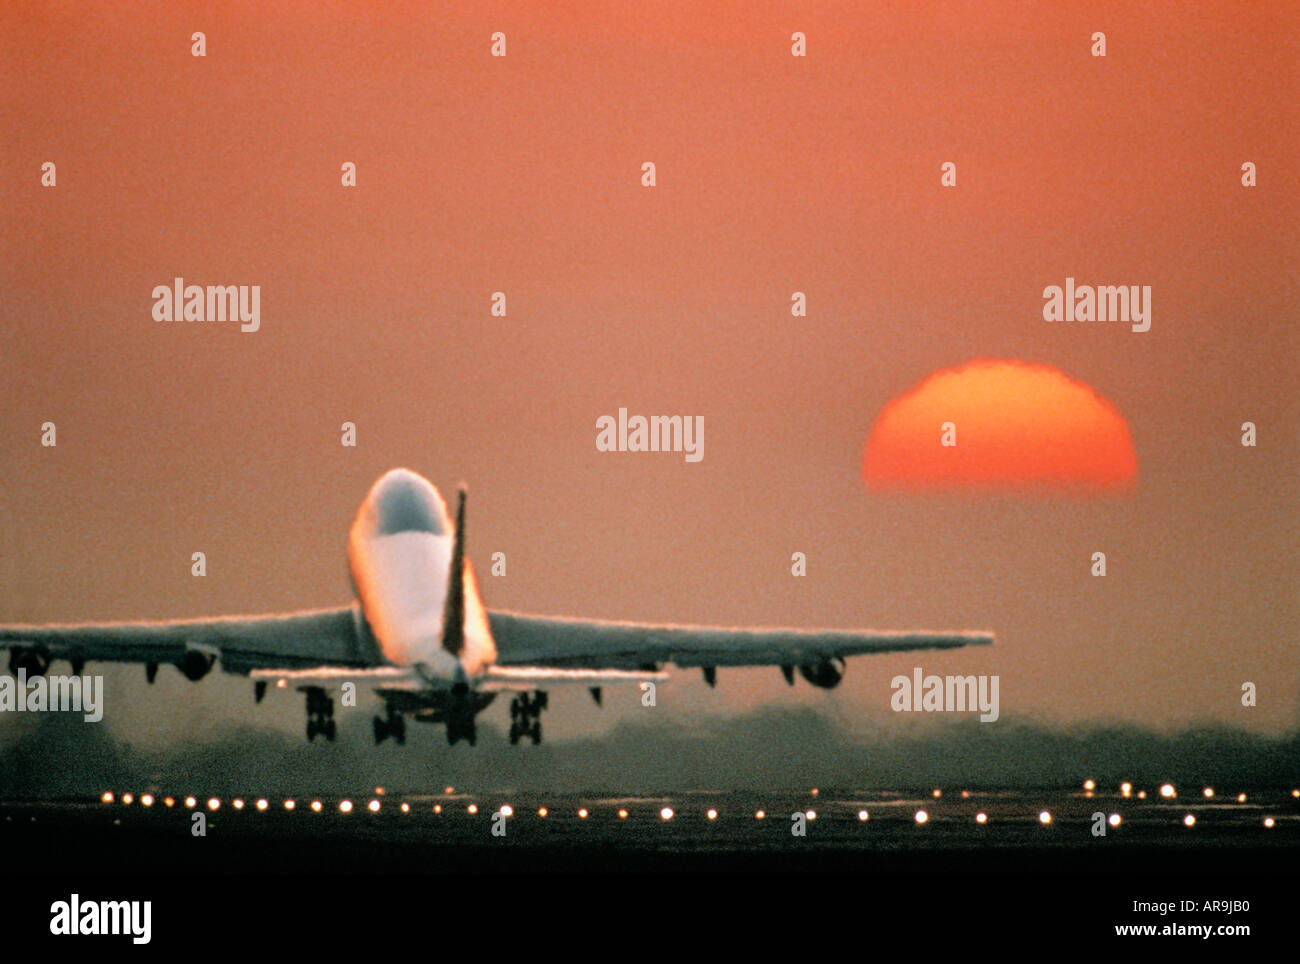 Boeing 747 jumbo jet in the air just above the runway lights flying heading into an golden orange sky at sunset sunrise dusk sho Stock Photo